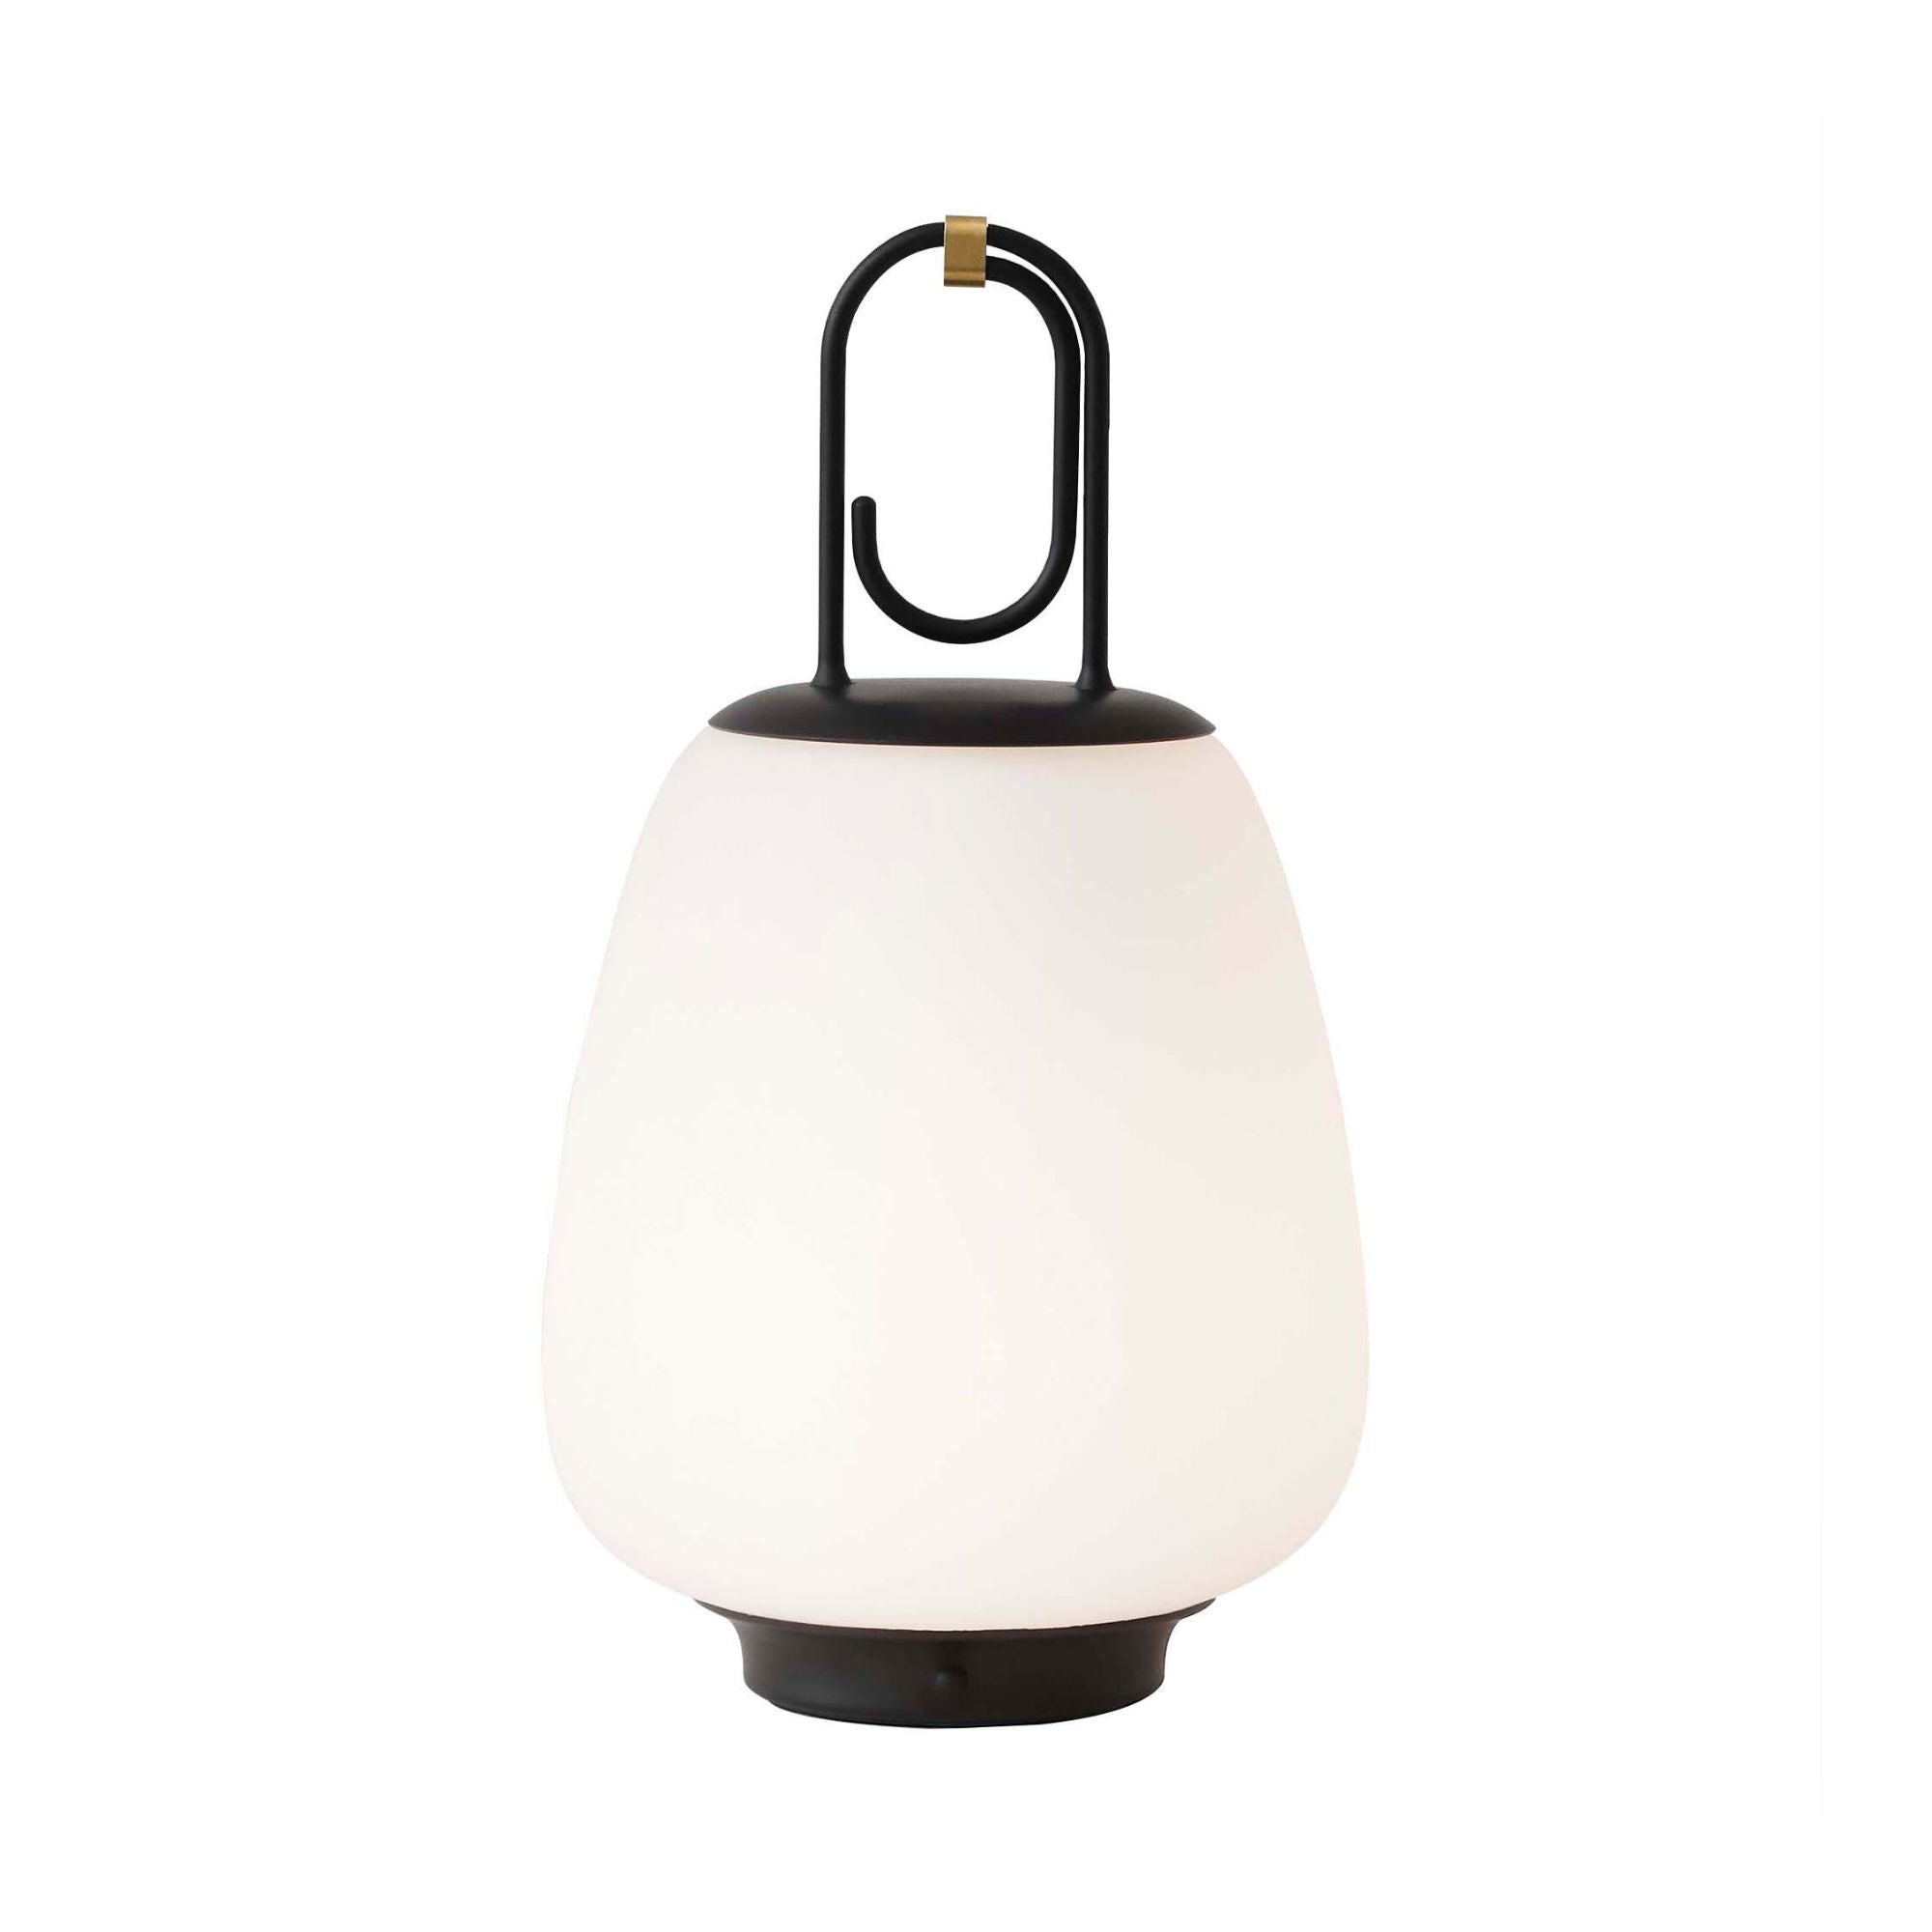 &Tradition SC51 Lucca rechargeable lamp, Black